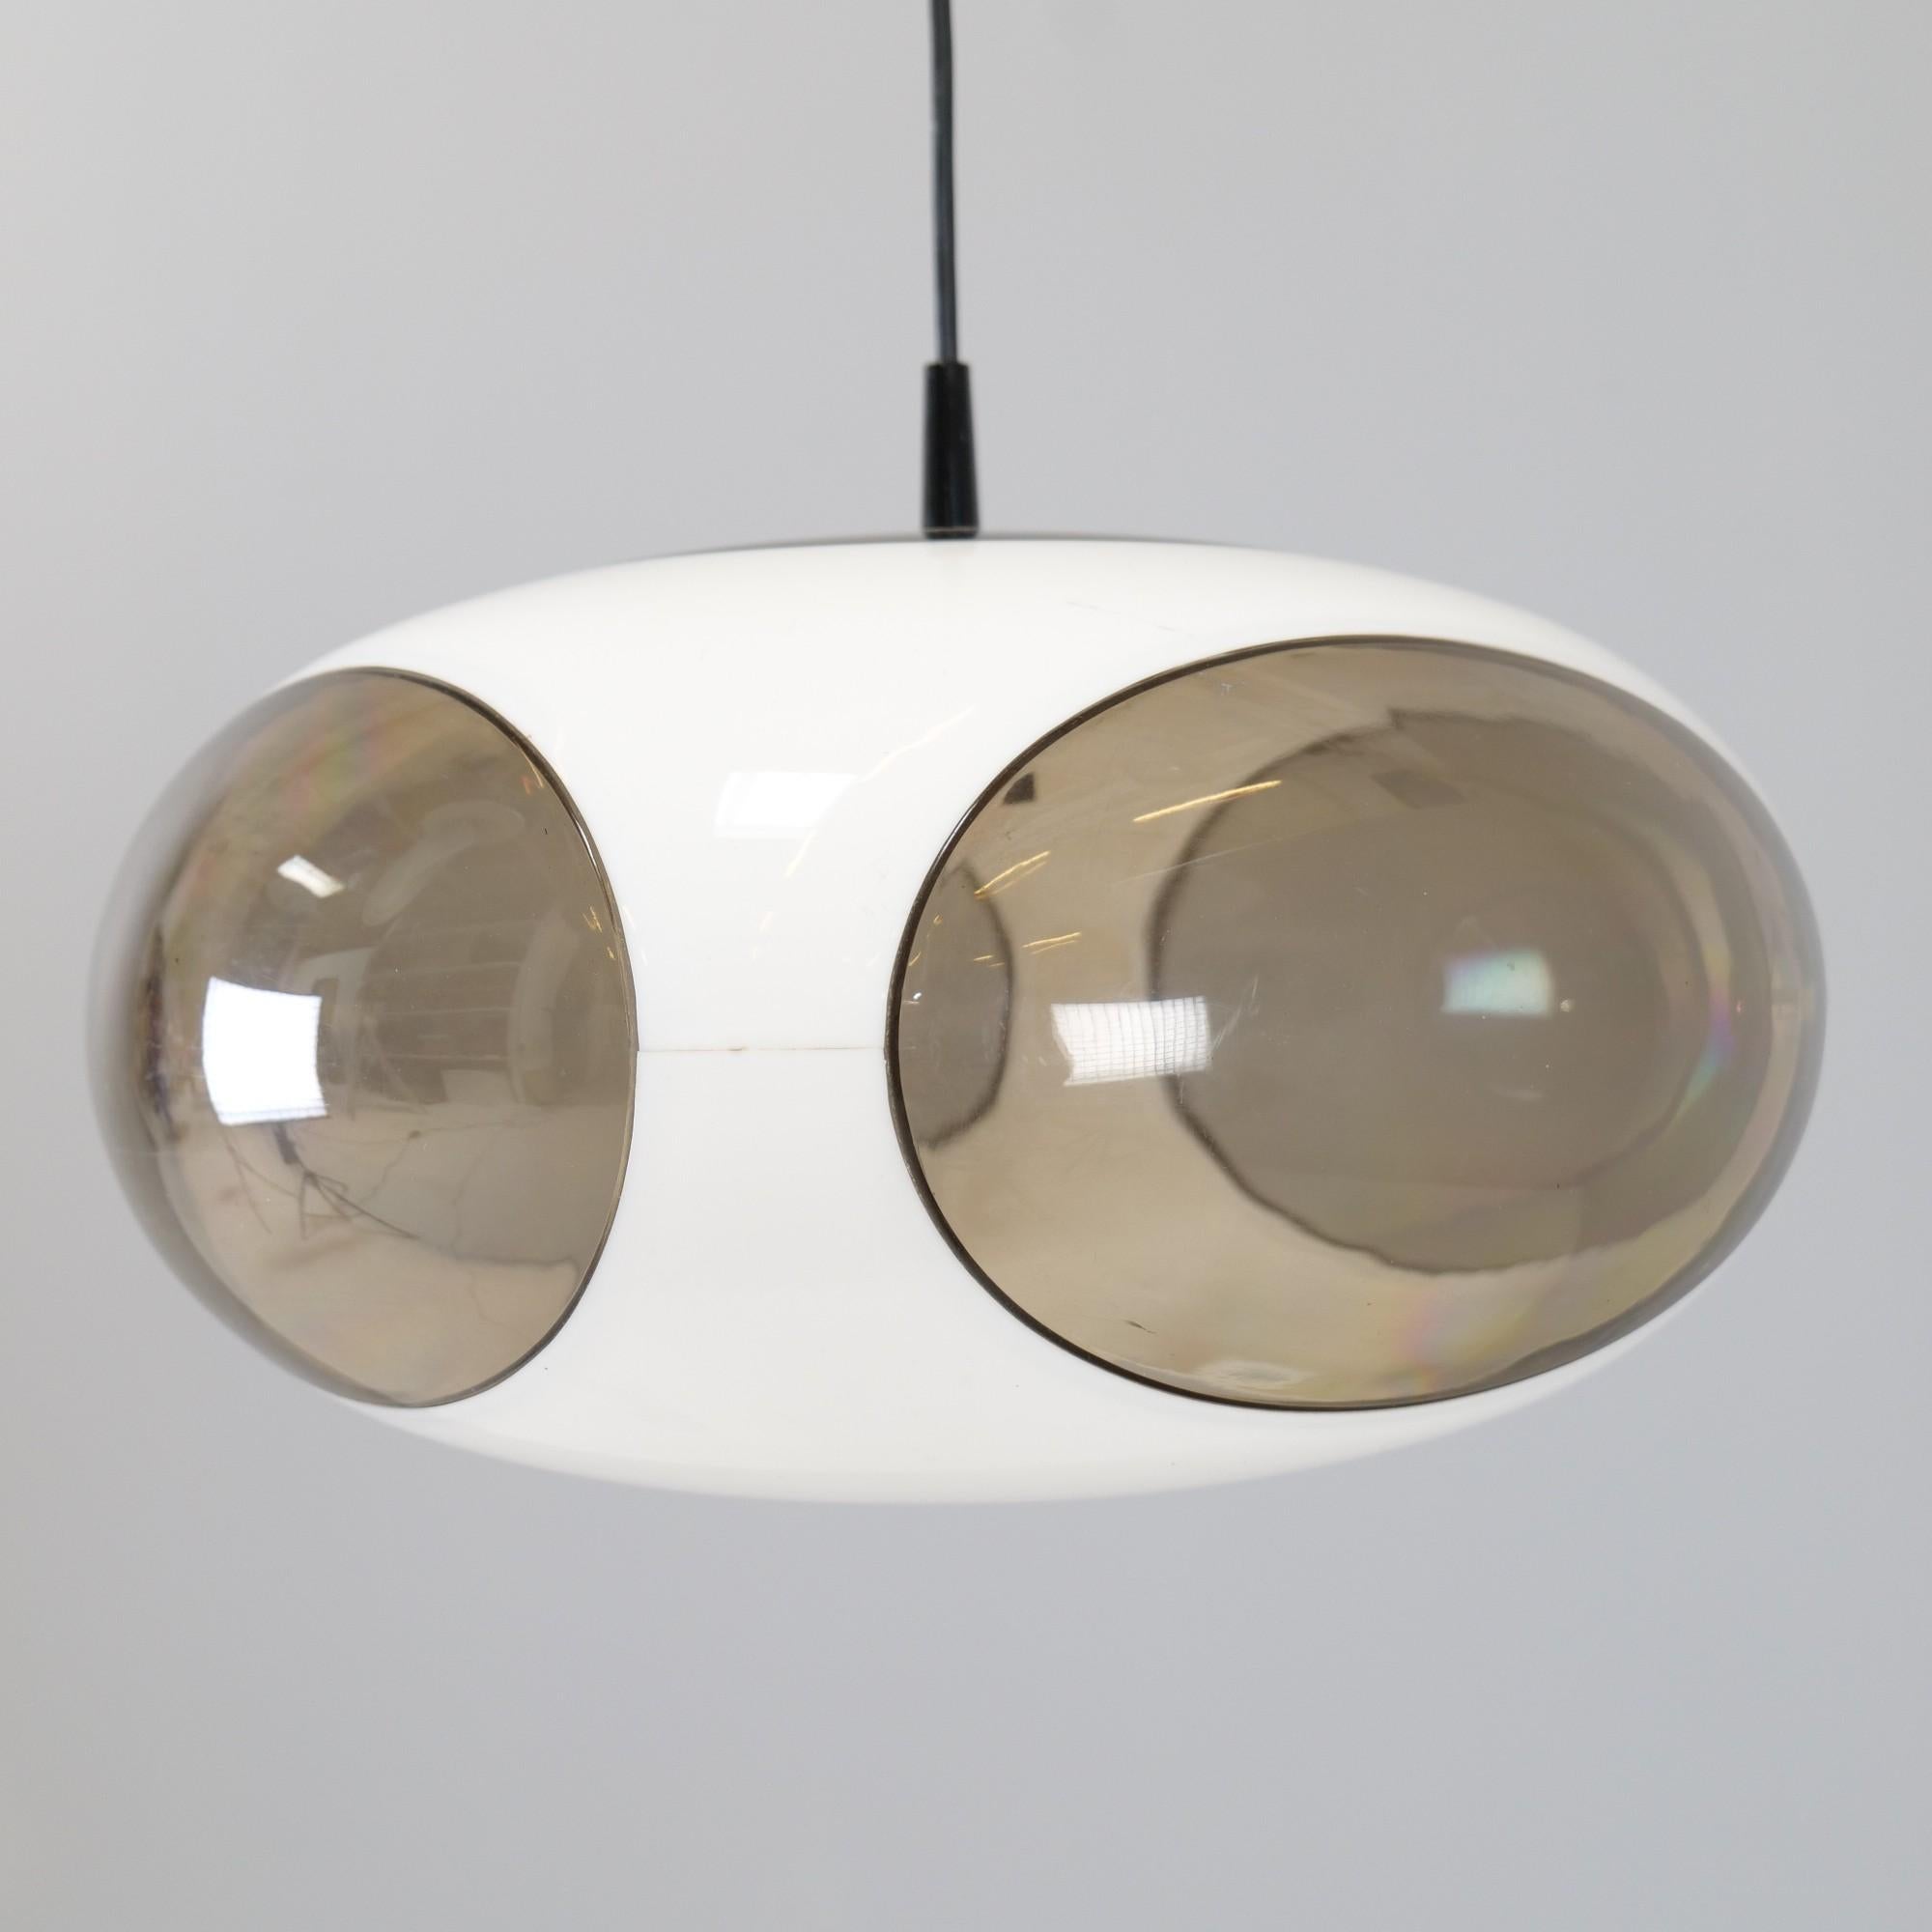 Space Age vintage white space age ceiling lamp by massive lighting style of Luigi Colani